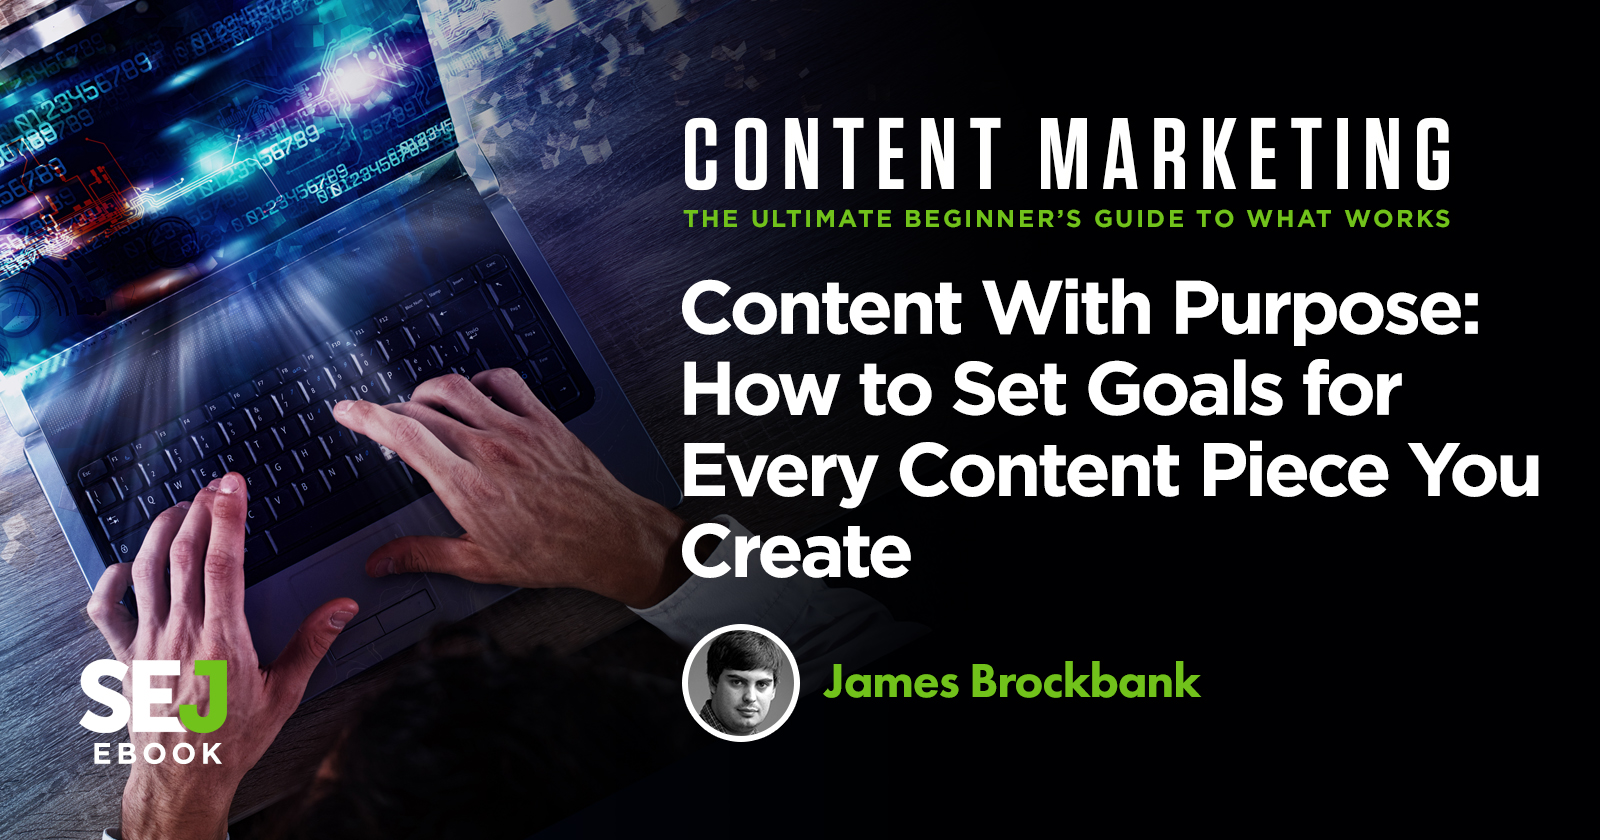 A Guide to Setting Goals for Every Content Piece